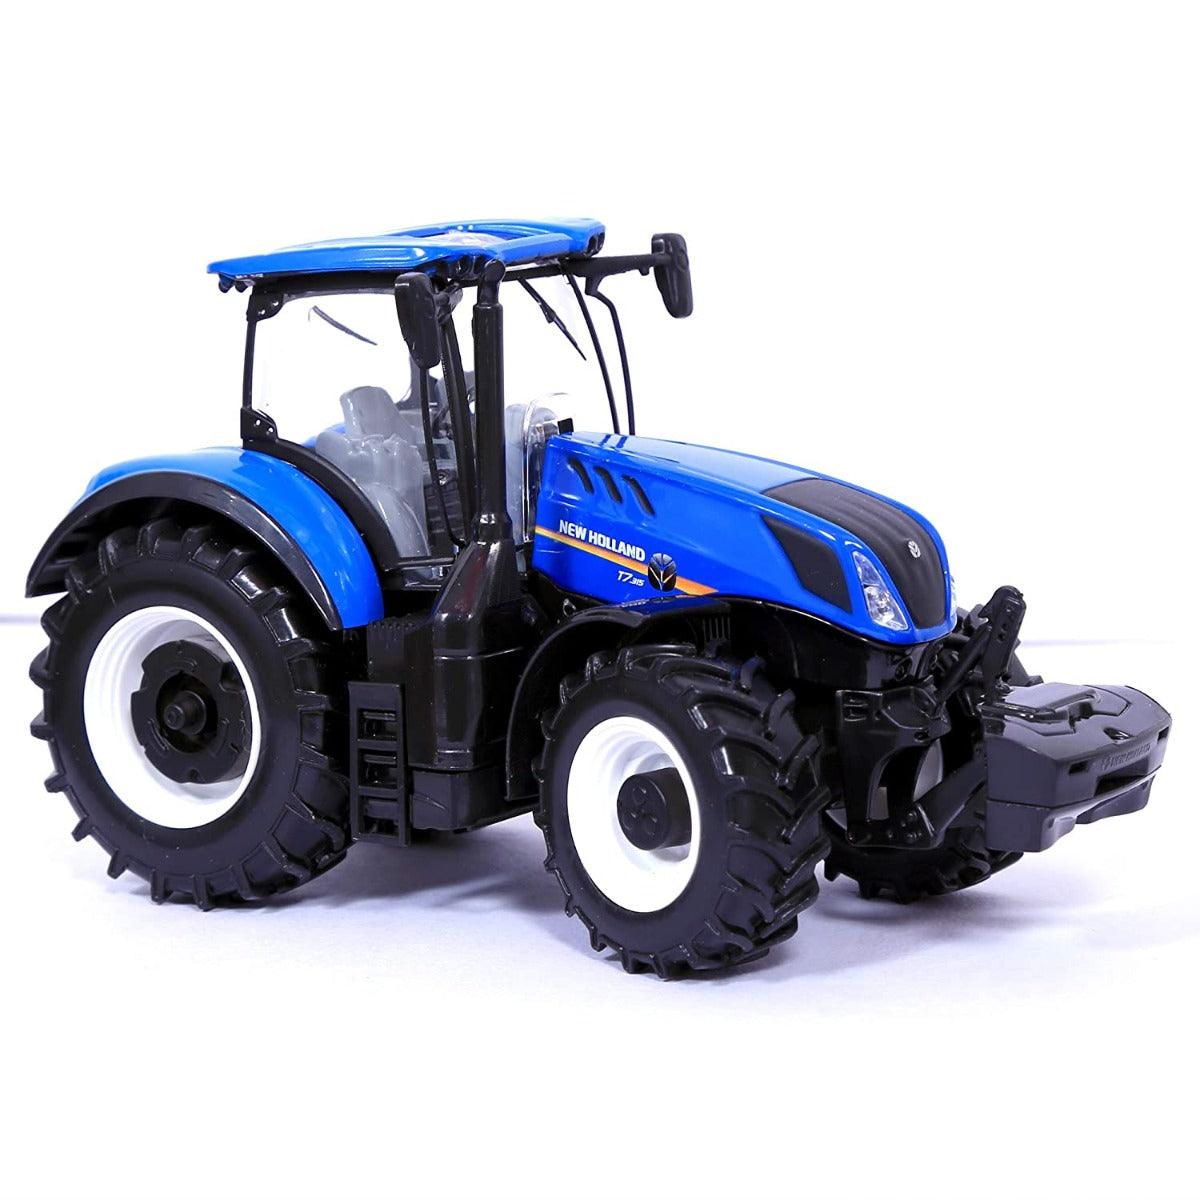 Bburago Metal Diecast Farm Tractor Long Friction New Holland T7 (Blue) for Ages 5+